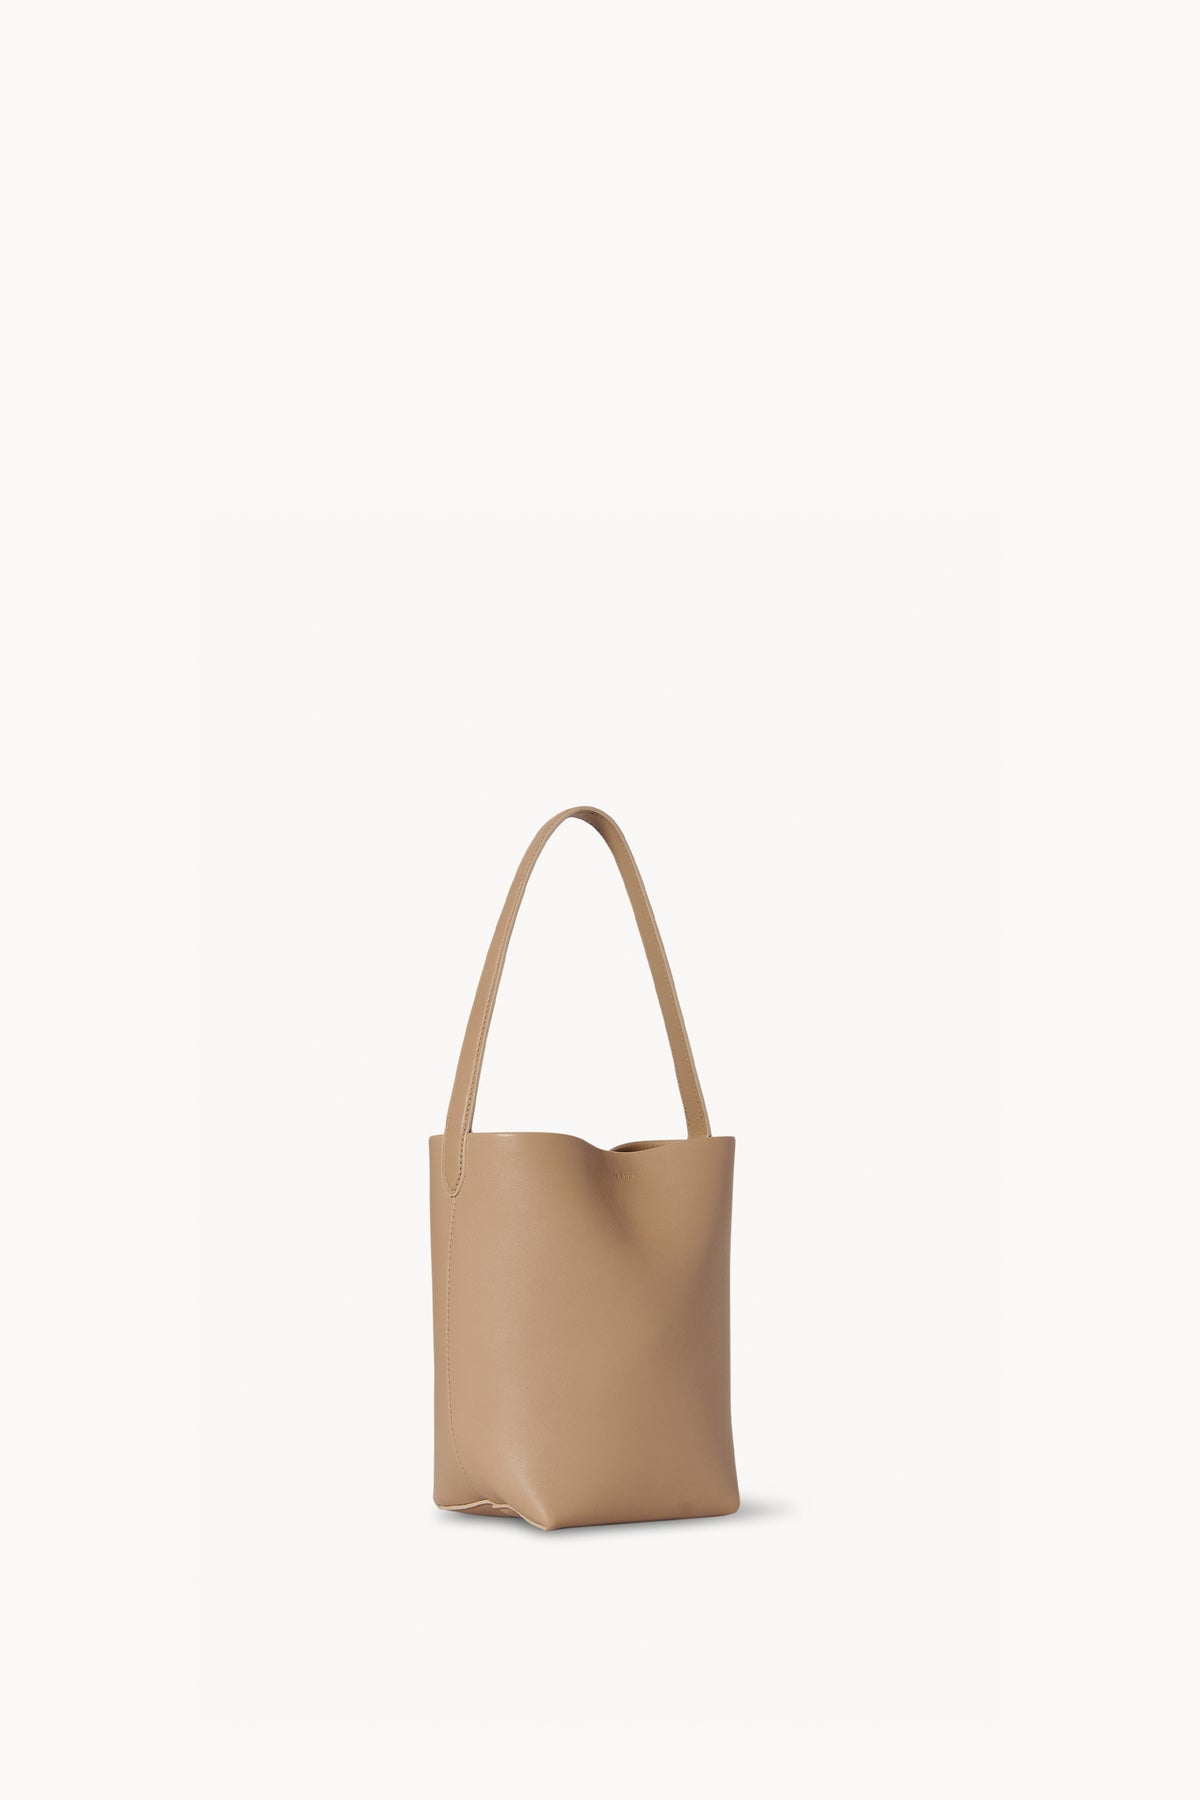 The Row, Small N/S Park light beige tote bag